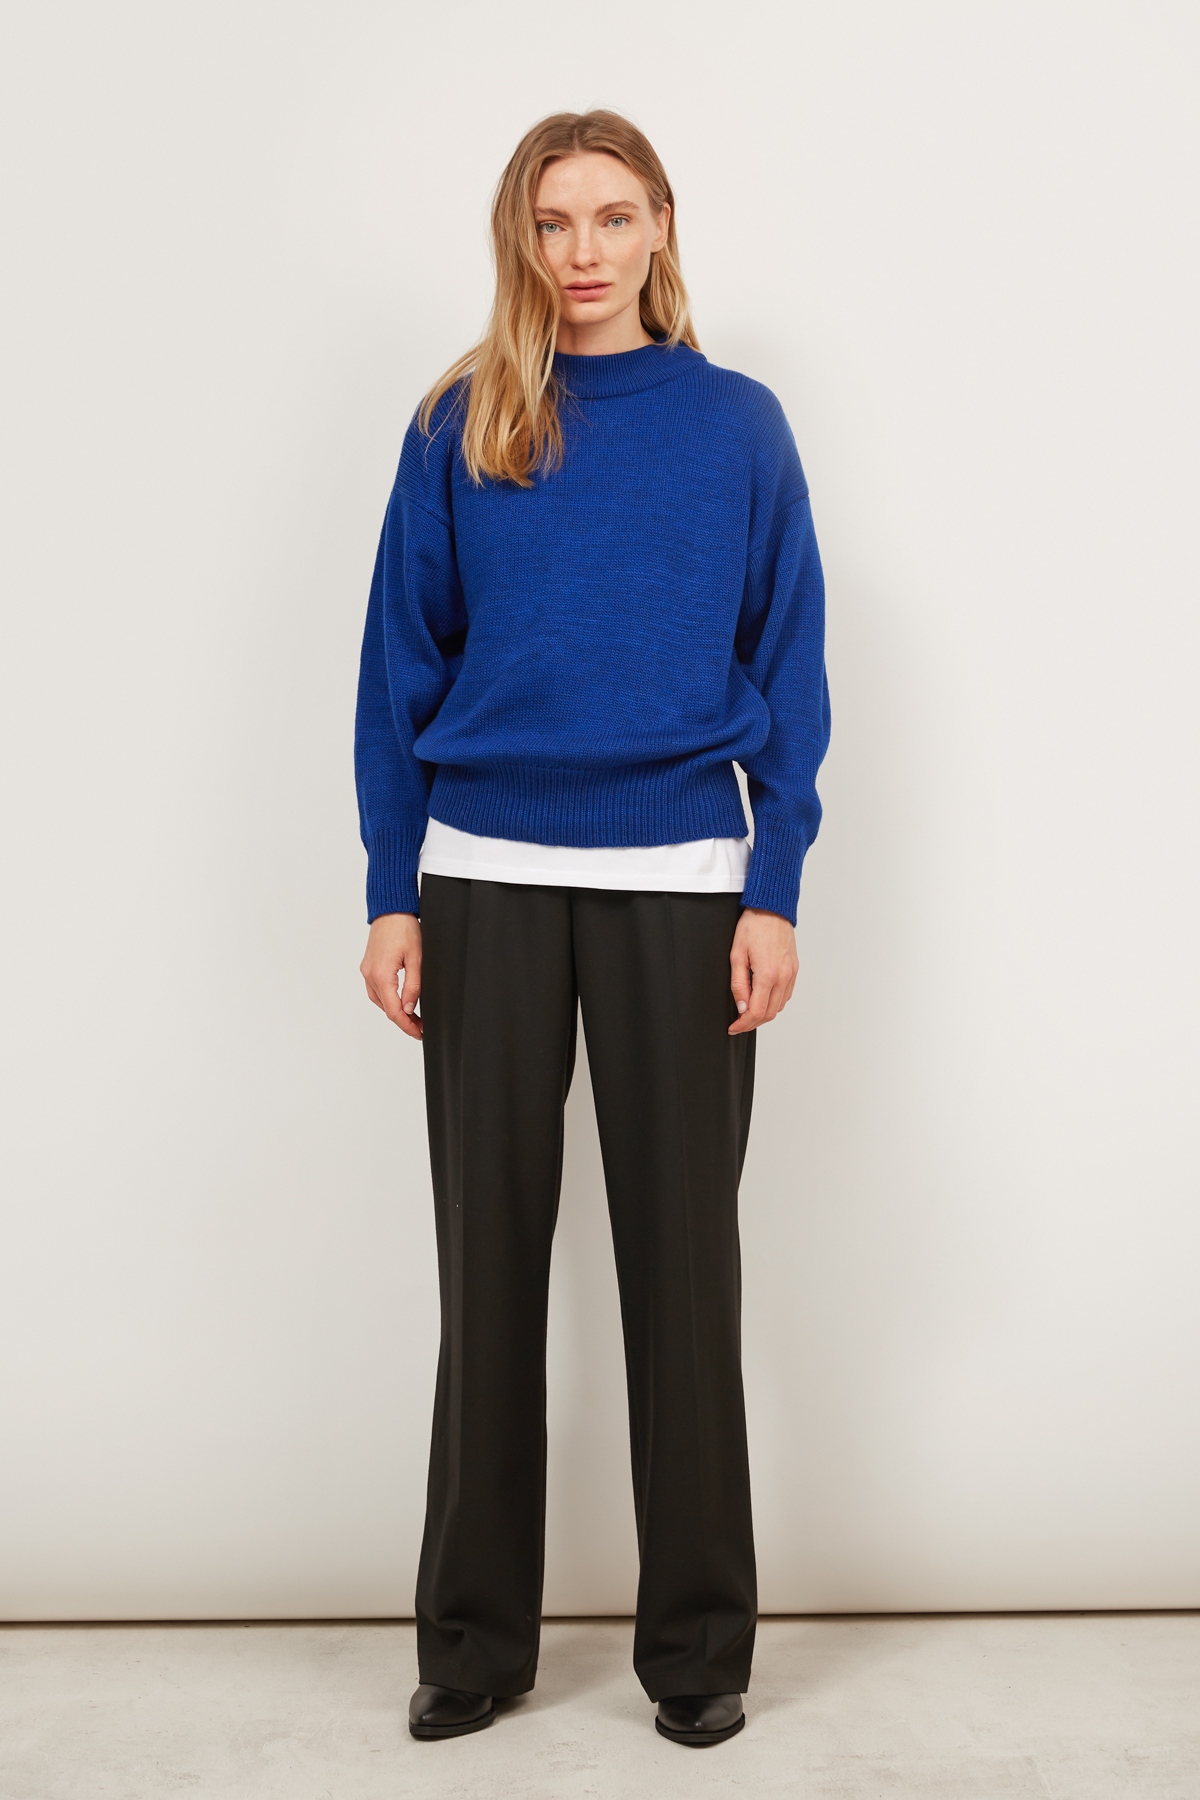 Electric blue knitted sweater, photo 1